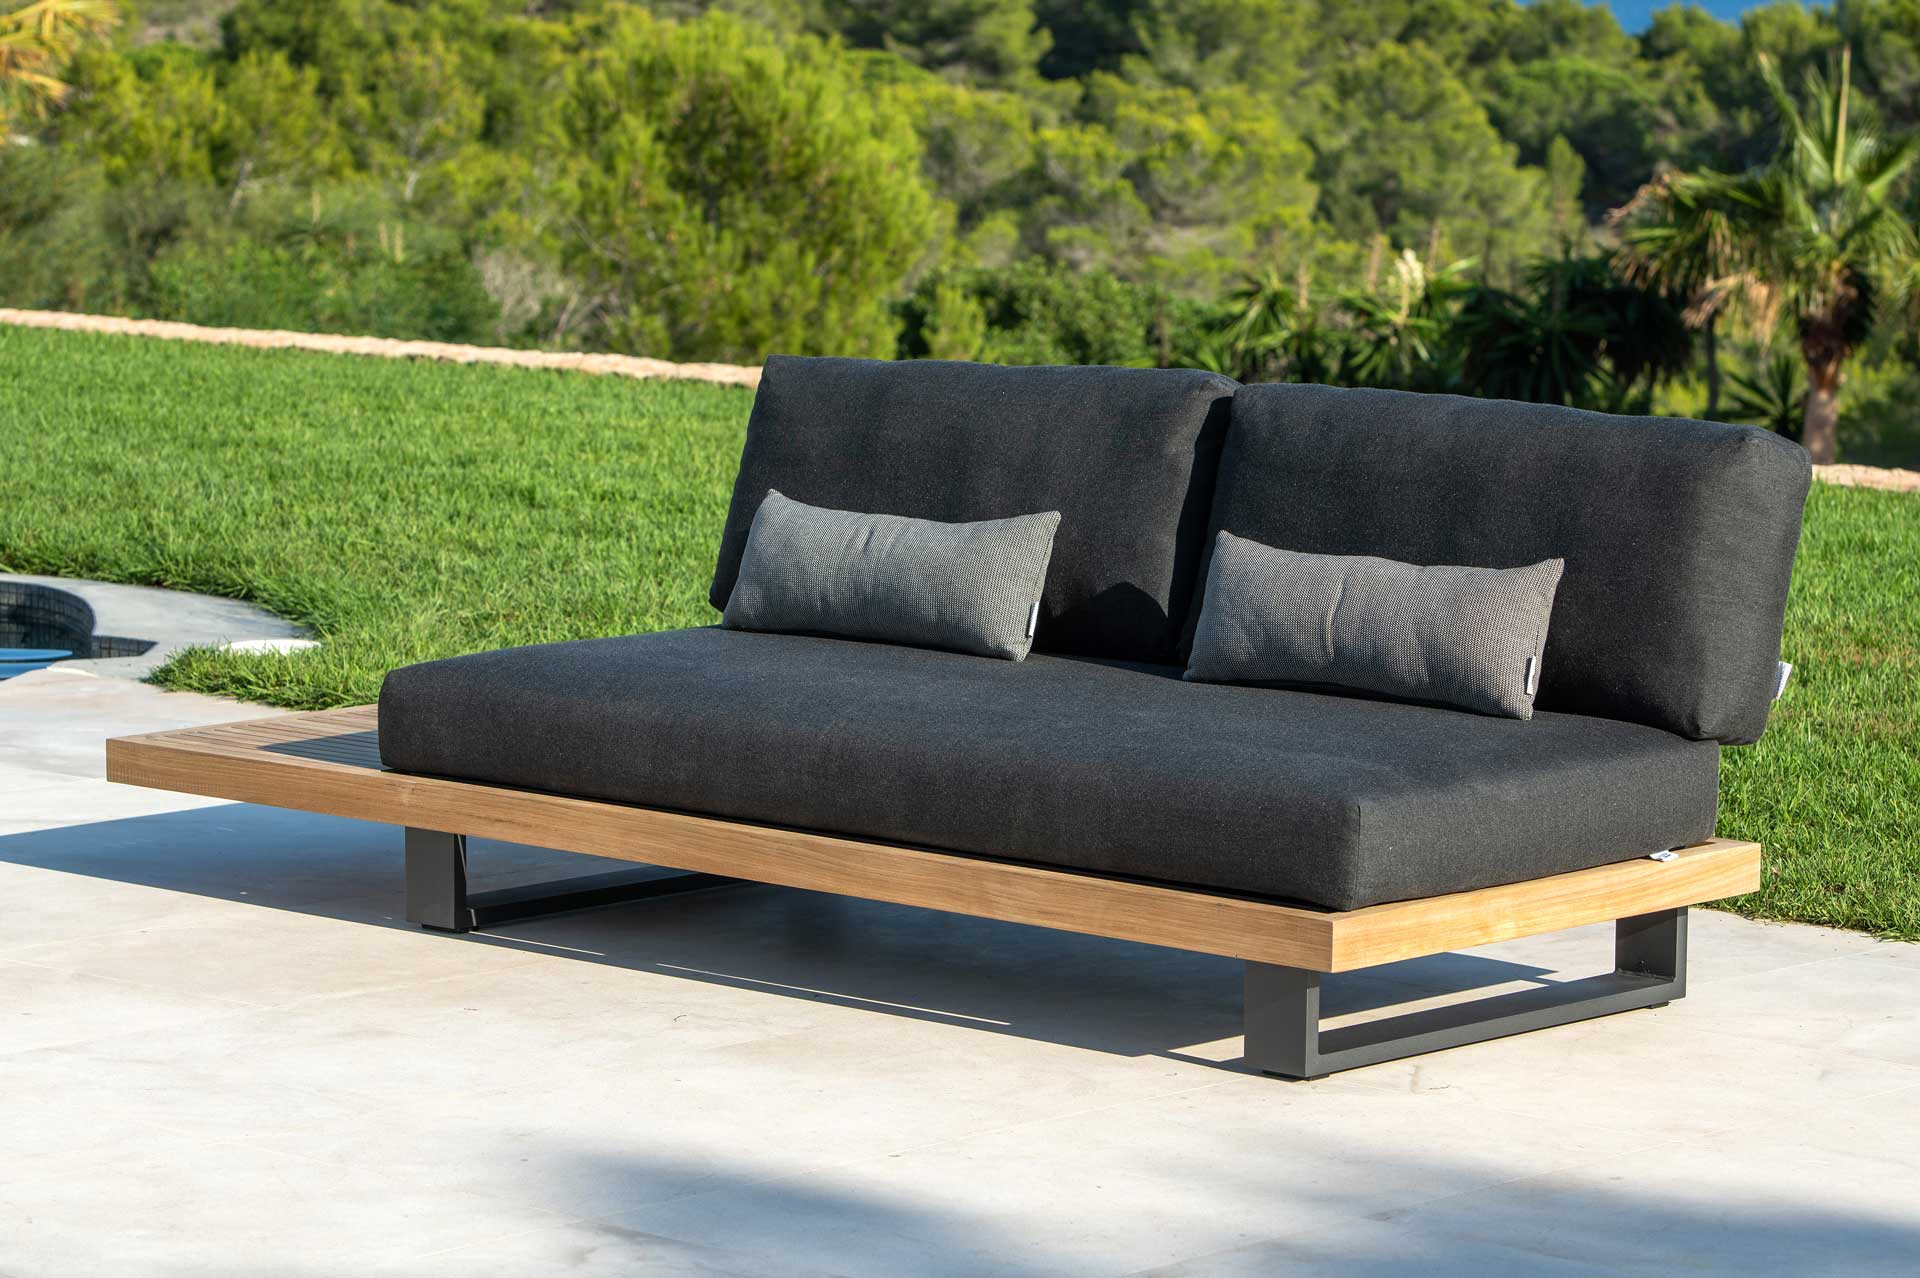 Truro living bench 2-seater